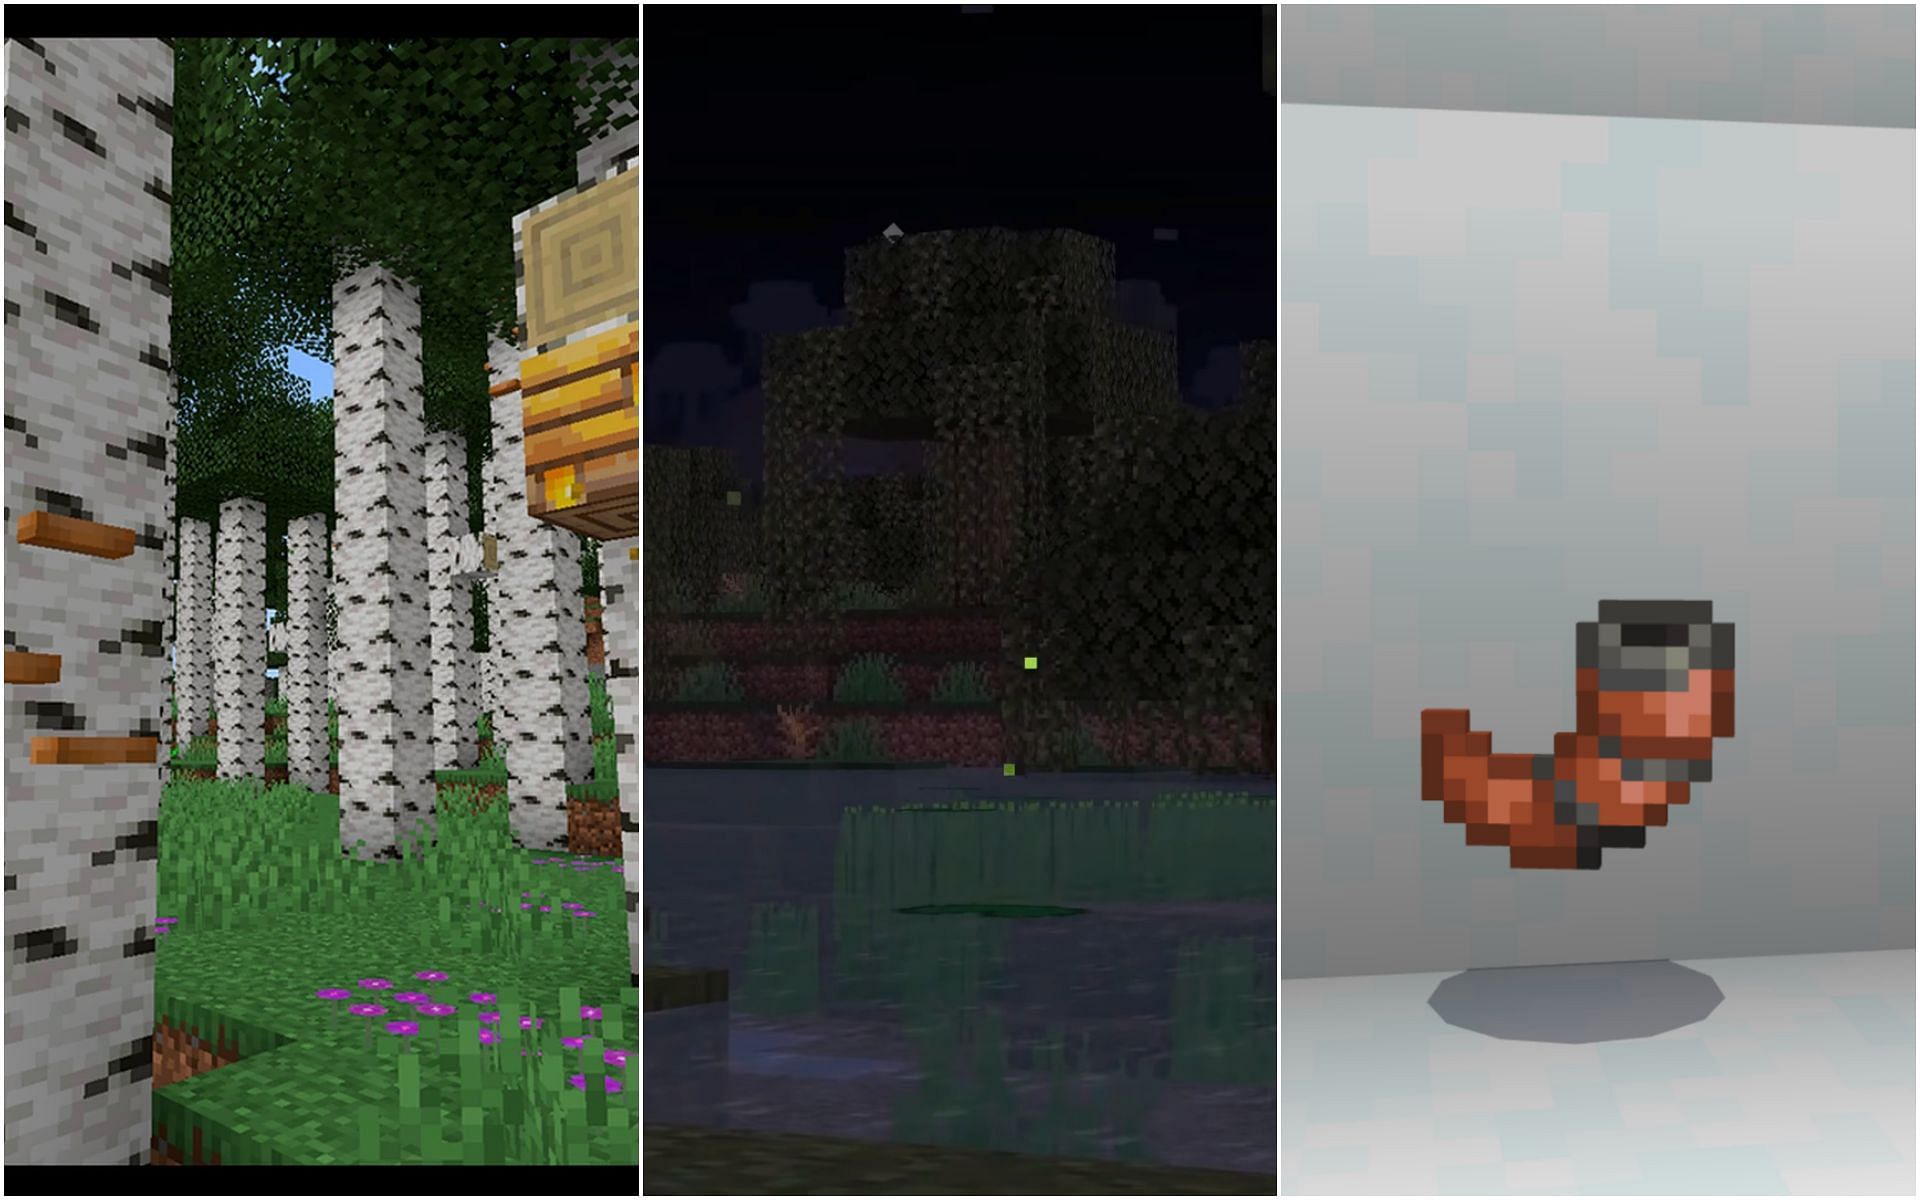 Top 4 features that were removed from Minecraft (Image via Minecraft)